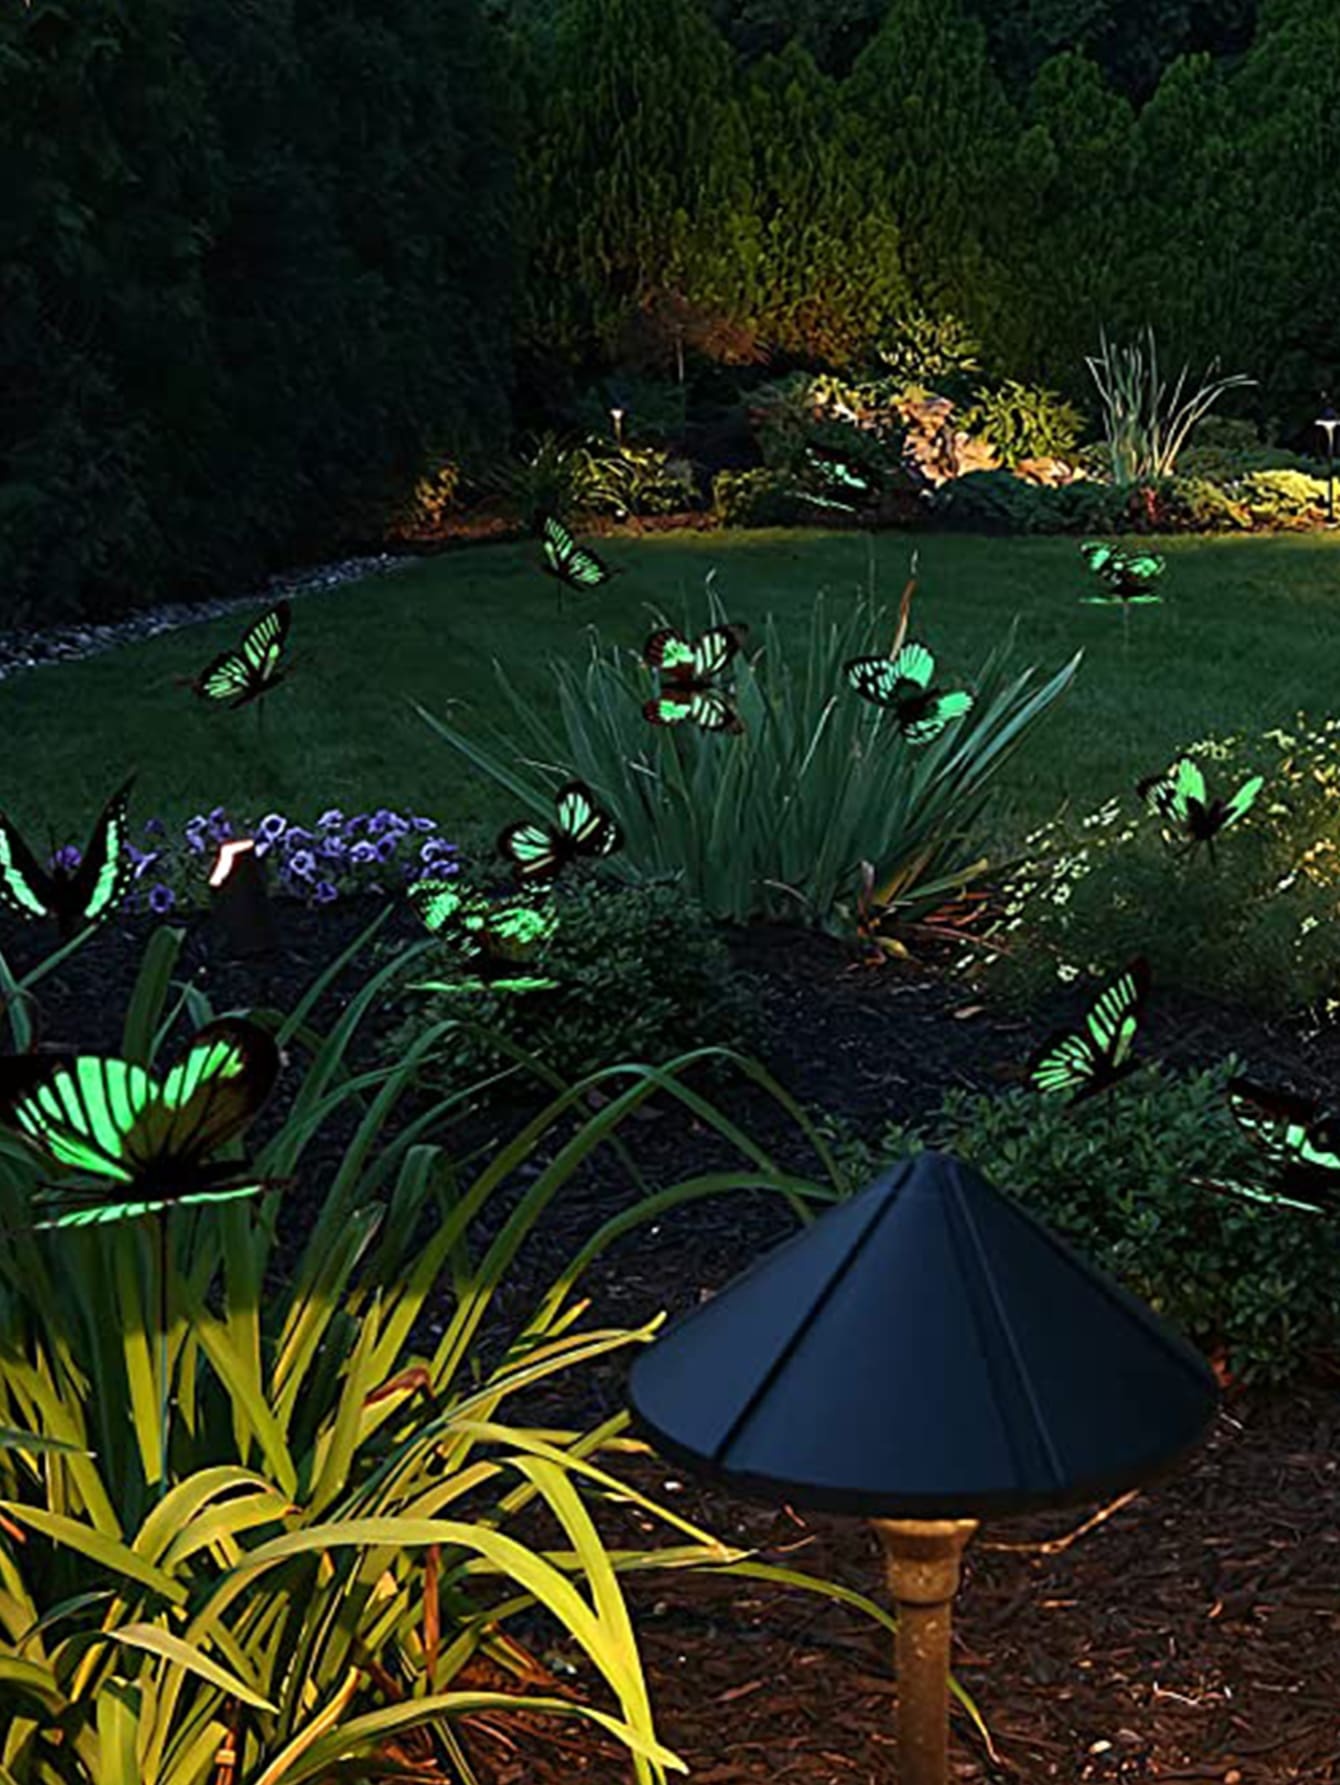 10pcs Glow In The Dark Random Color Decorative Garden Stake, Butterfly Garden Decoration For Household